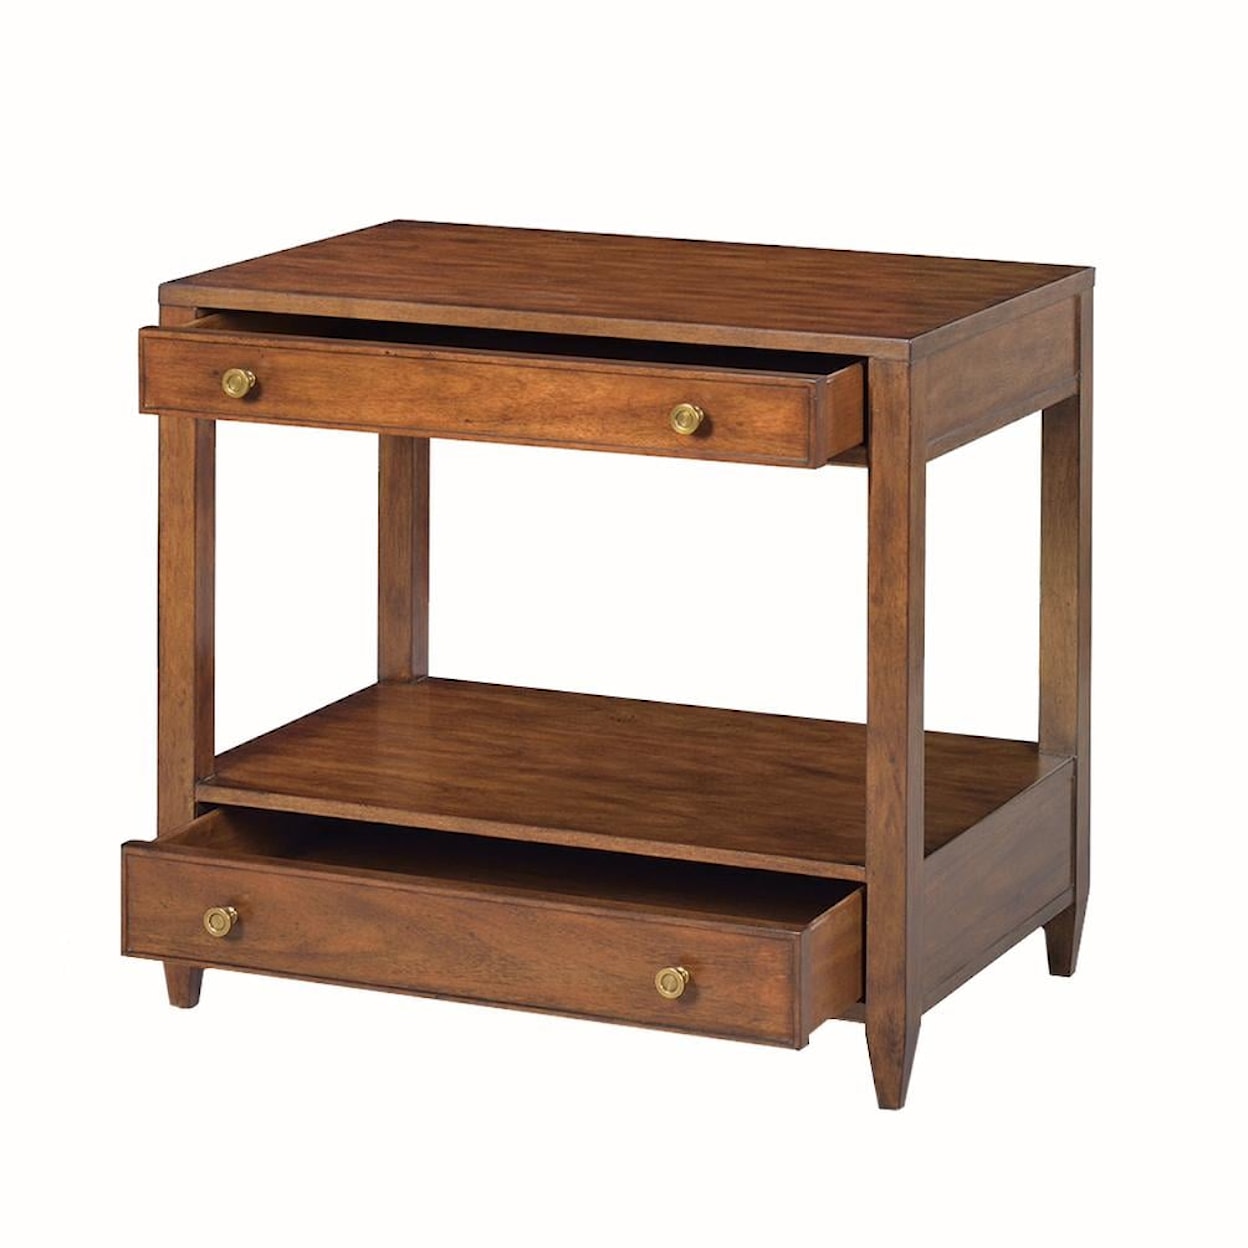 Oliver Home Furnishings End/ Side Tables WIDE, 2 DRAWER SIDE TABLE- RUSTIC